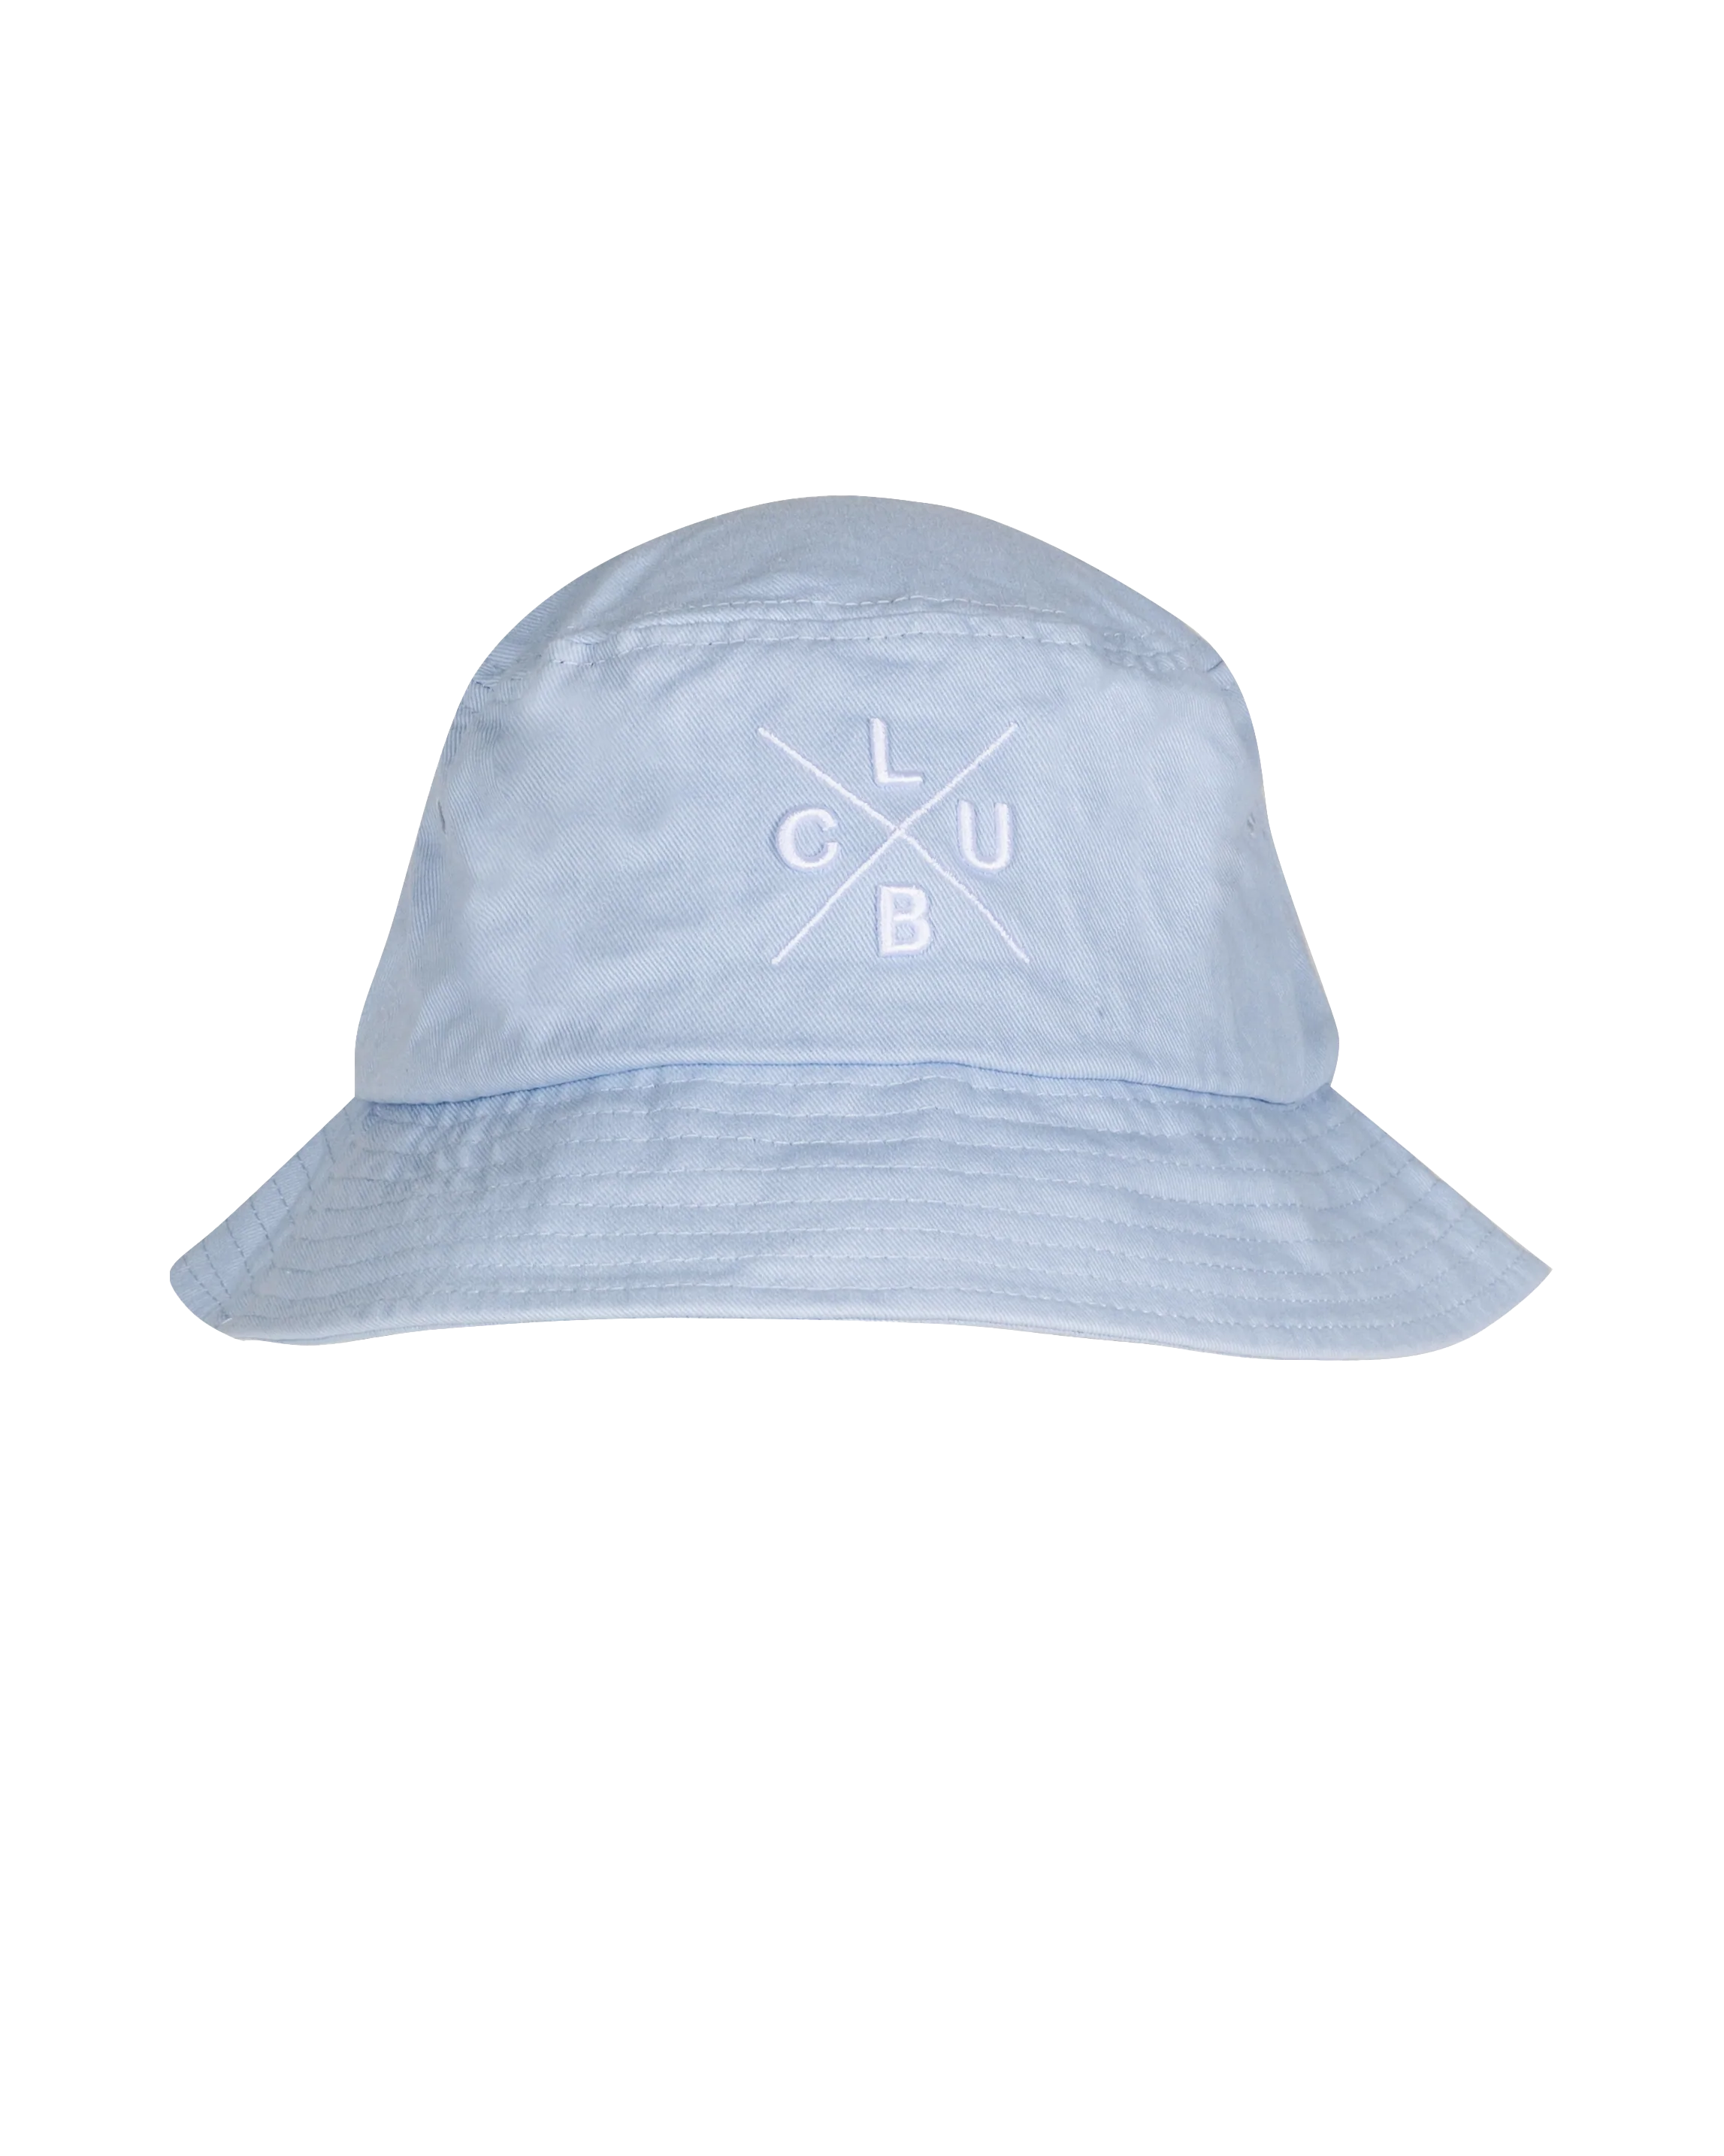 L'COUTURE Hats Blue / One Size Club LC Bucket Hat Blue